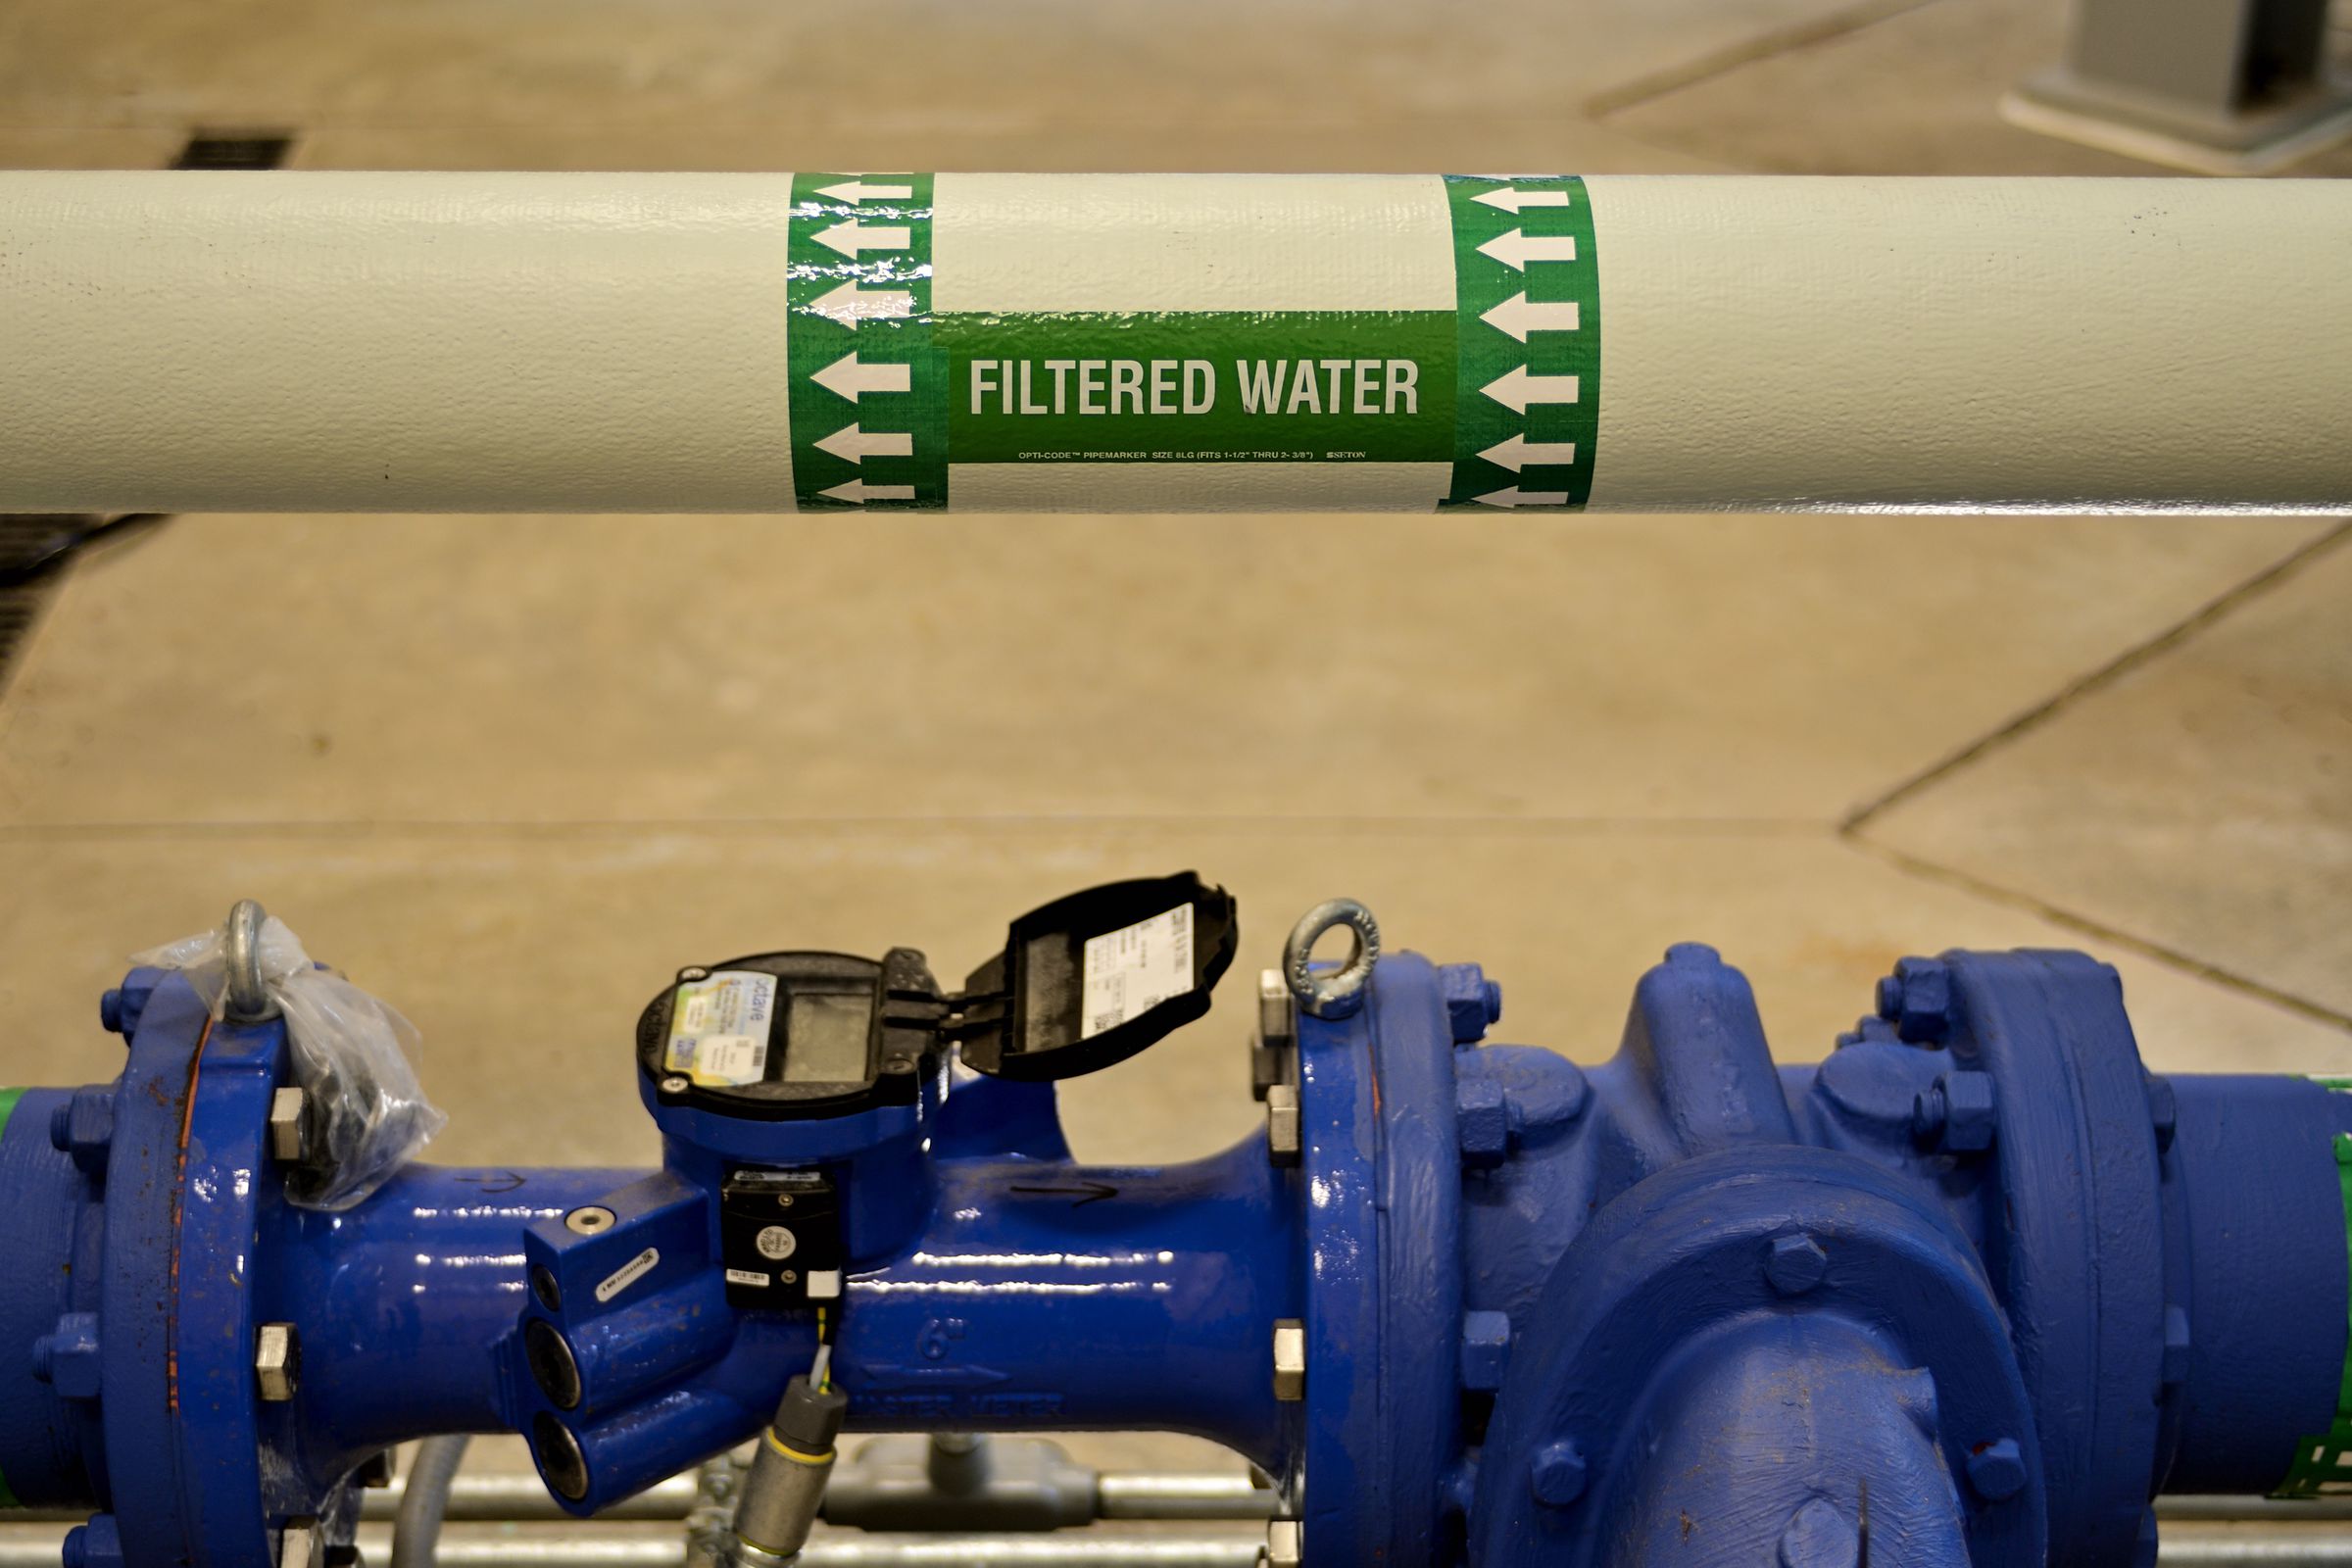 Pipes for a filtration system, with a label that says “filtered water.”